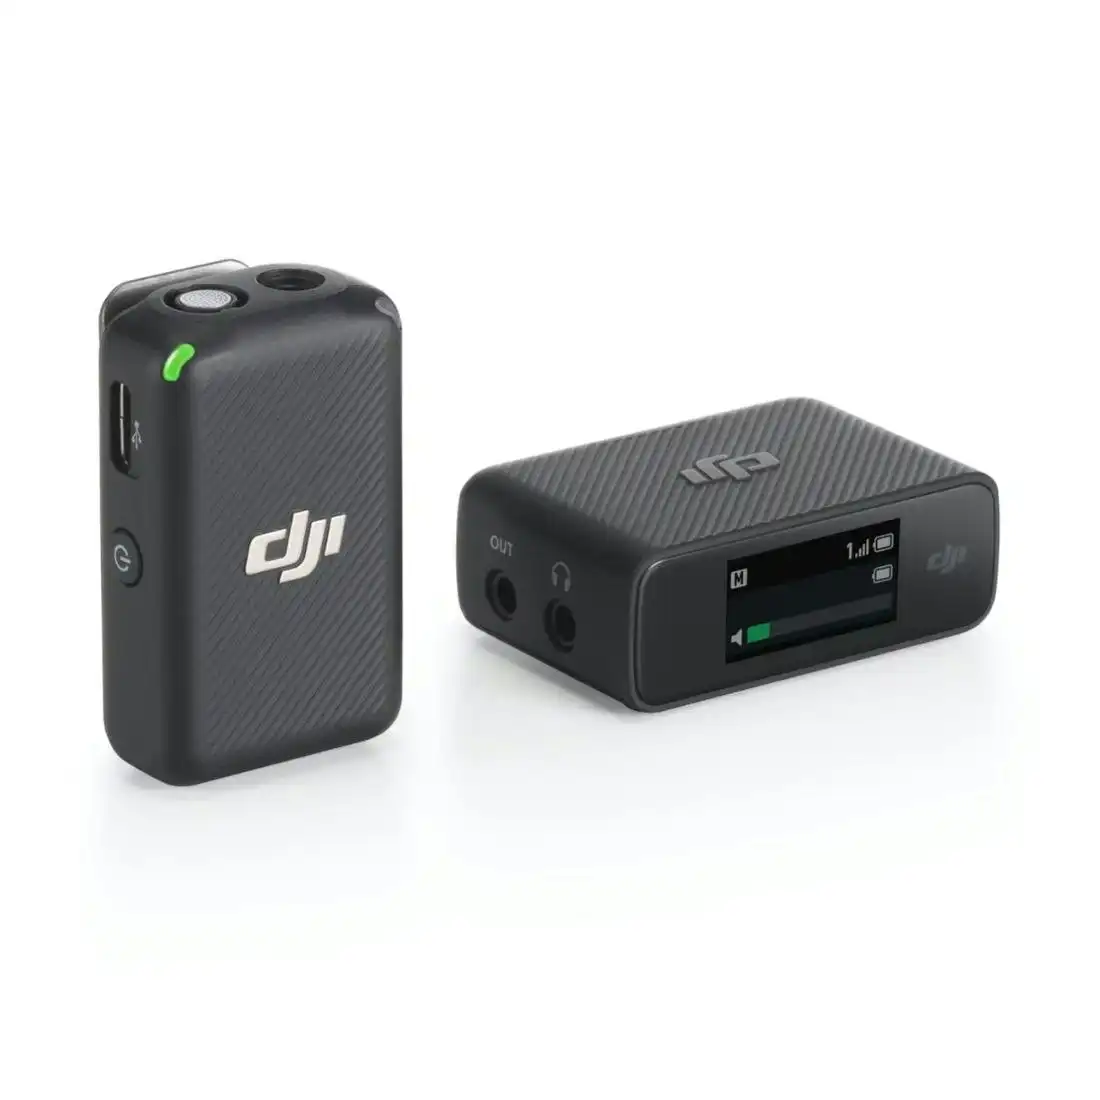 Dji Mic (1 Transmitter + 1 Receiver) Wireless Microphone (For Android, iPhone, PC, Camera)